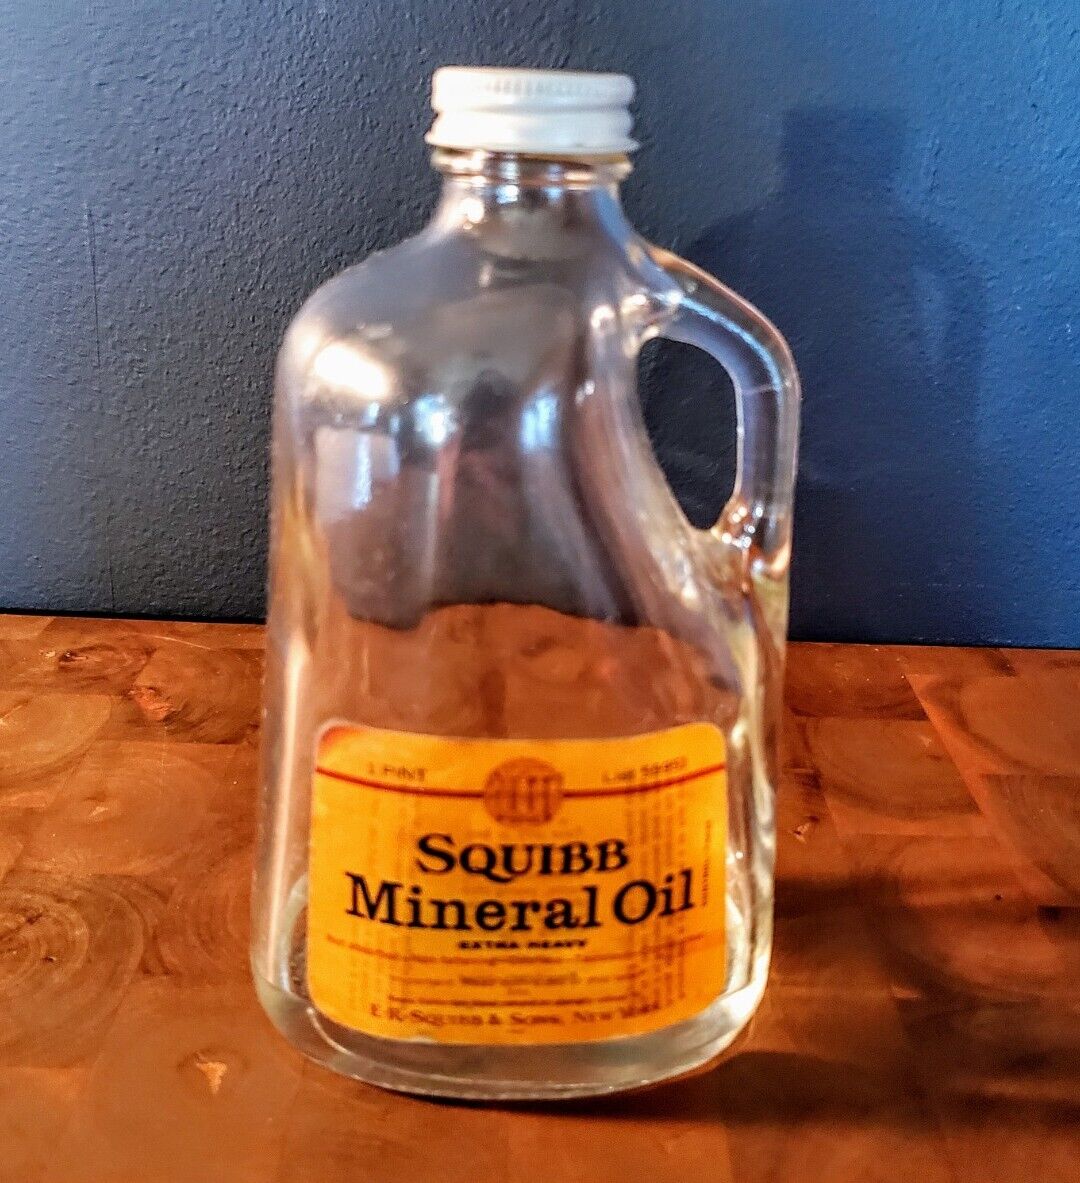 Vintage Squibb Mineral Oil Apothecary Clear Glass Bottle with Label 1 Pint 